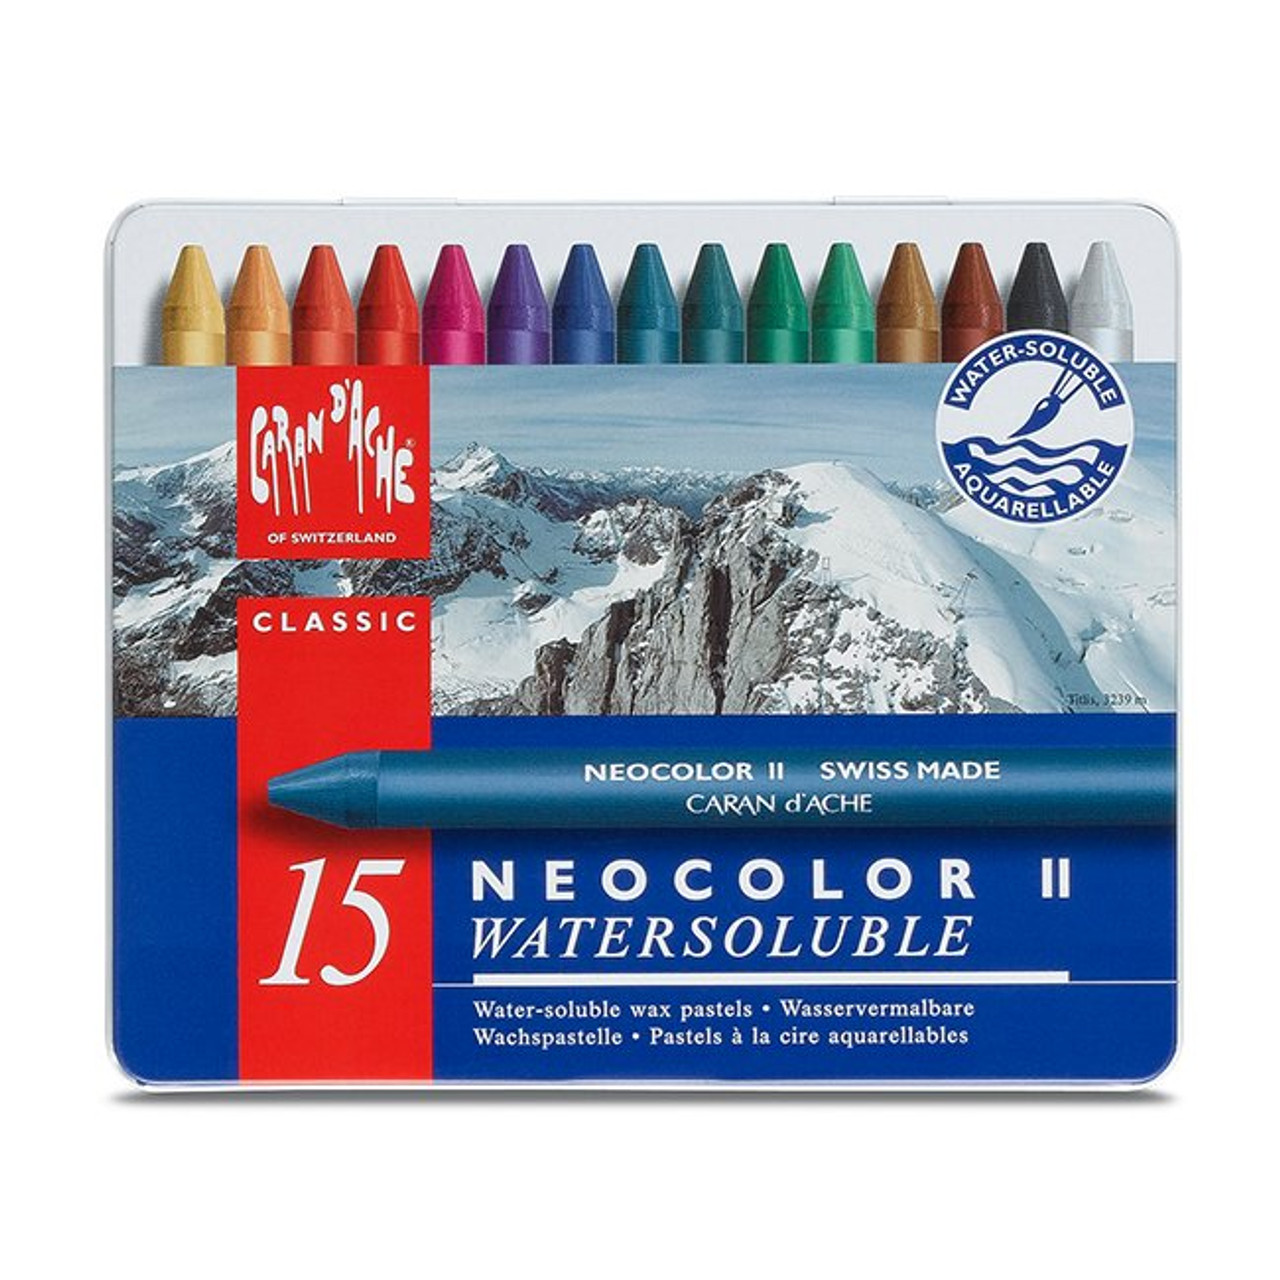 https://cdn11.bigcommerce.com/s-hk3ilm7bo7/images/stencil/1280x1280/products/17388/9547/caran-d-ache-classic-neocolor-ii-water-soluble-crayons-assorted-colors-set-of-15__69343.1579300504.jpg?c=2